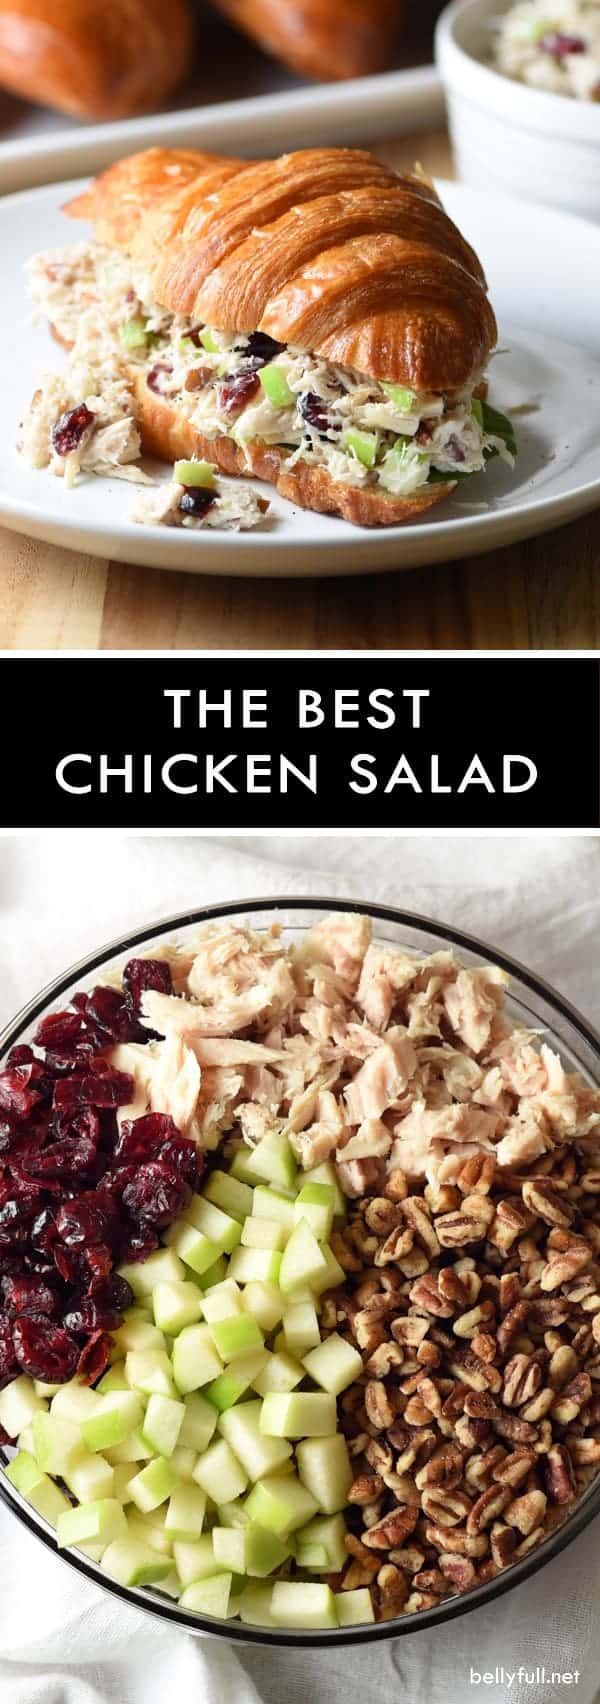 Chicken Salad Recipe With Apples
 The Best Chicken Salad With Cranberries Apples and Pecans